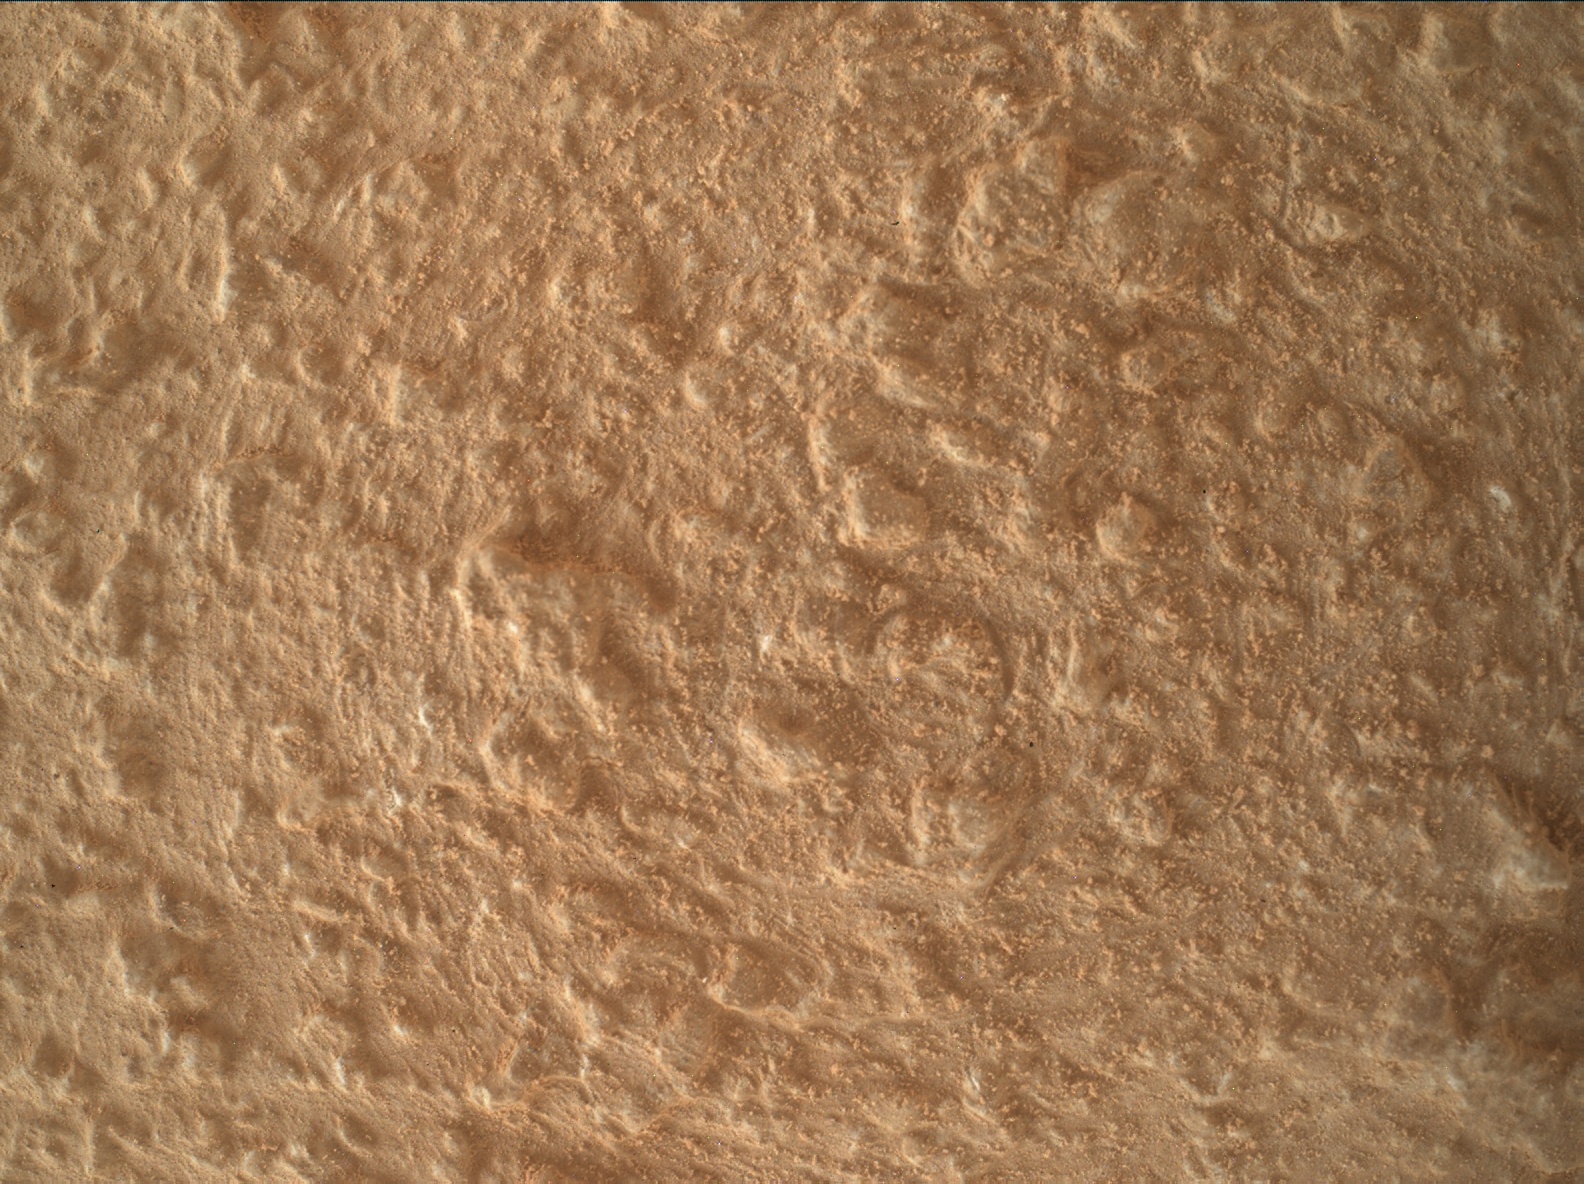 Nasa's Mars rover Curiosity acquired this image using its Mars Hand Lens Imager (MAHLI) on Sol 3810